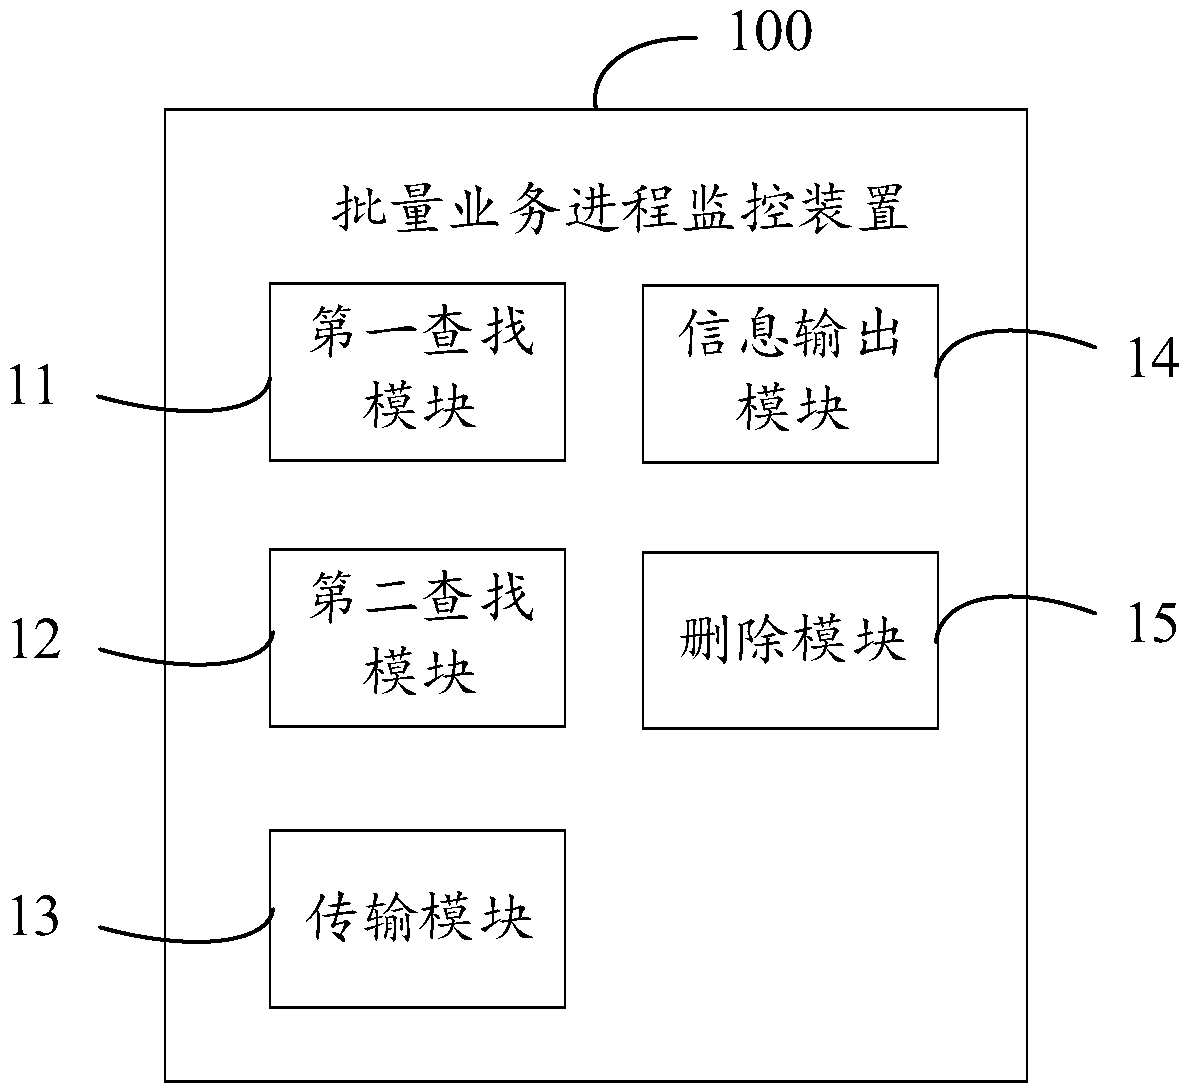 Batch business process monitoring method and device, computer and readable storage medium